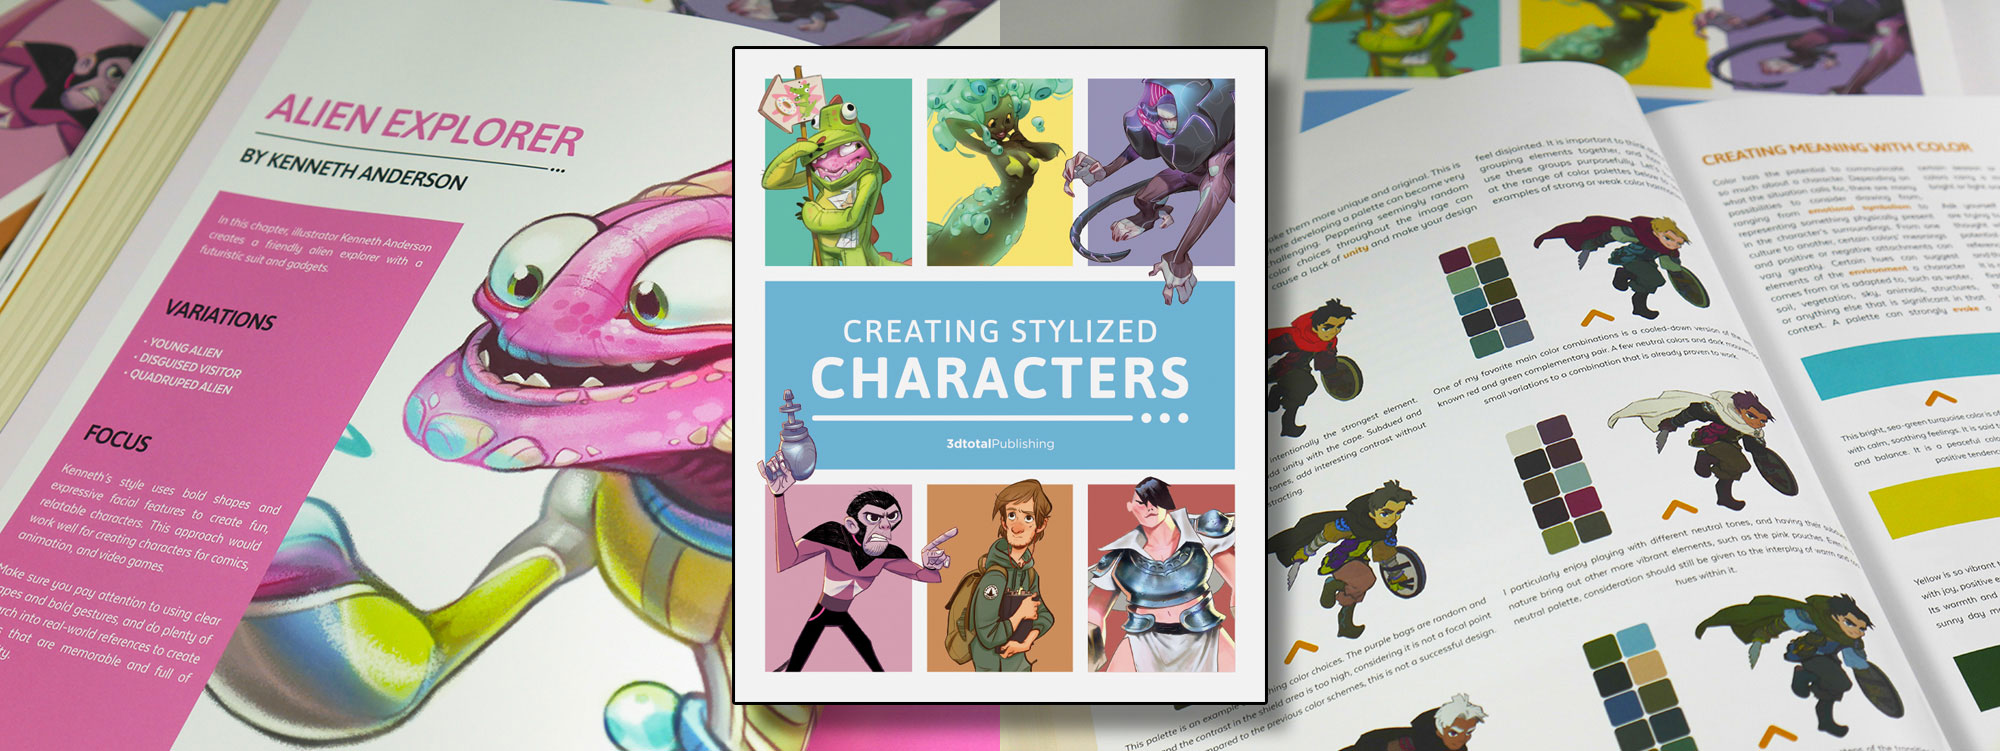 image of creating stylized characters book and spreads